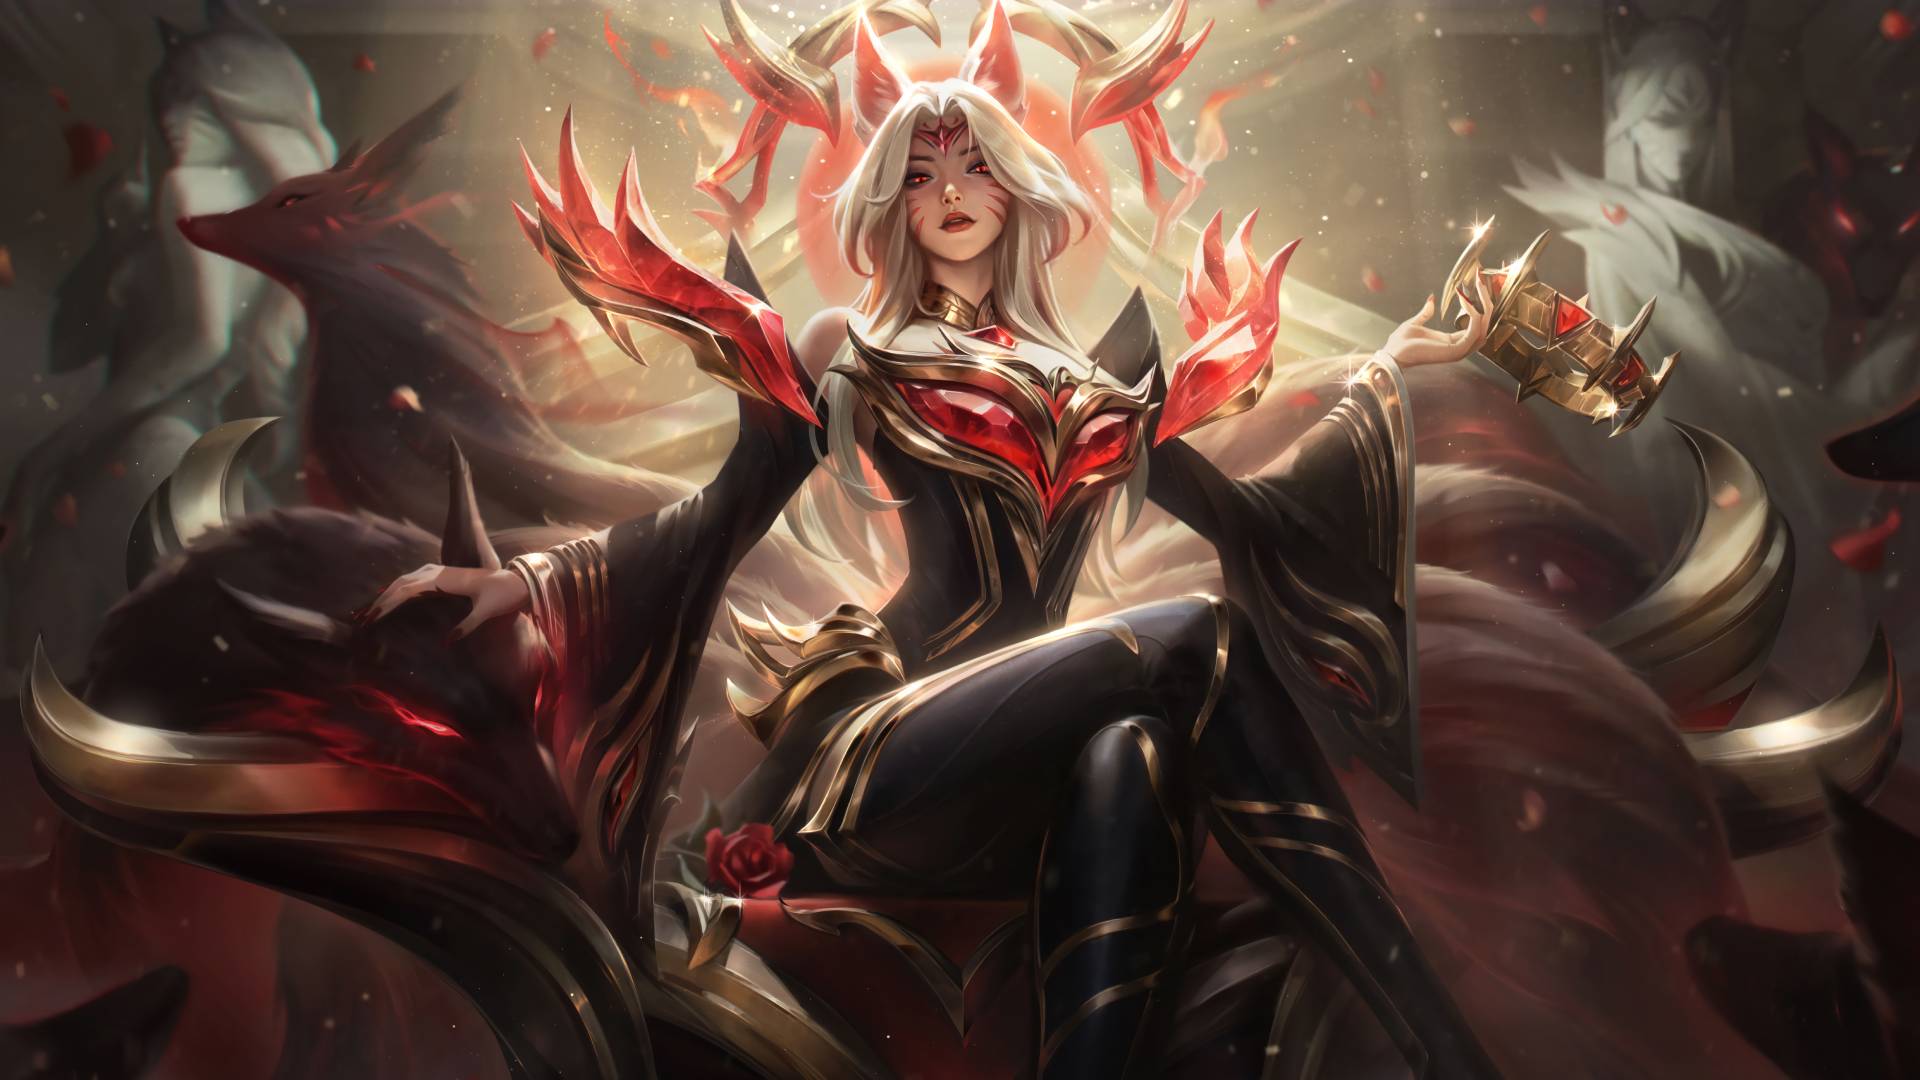 Riot says the League of Legends skin price backlash is 